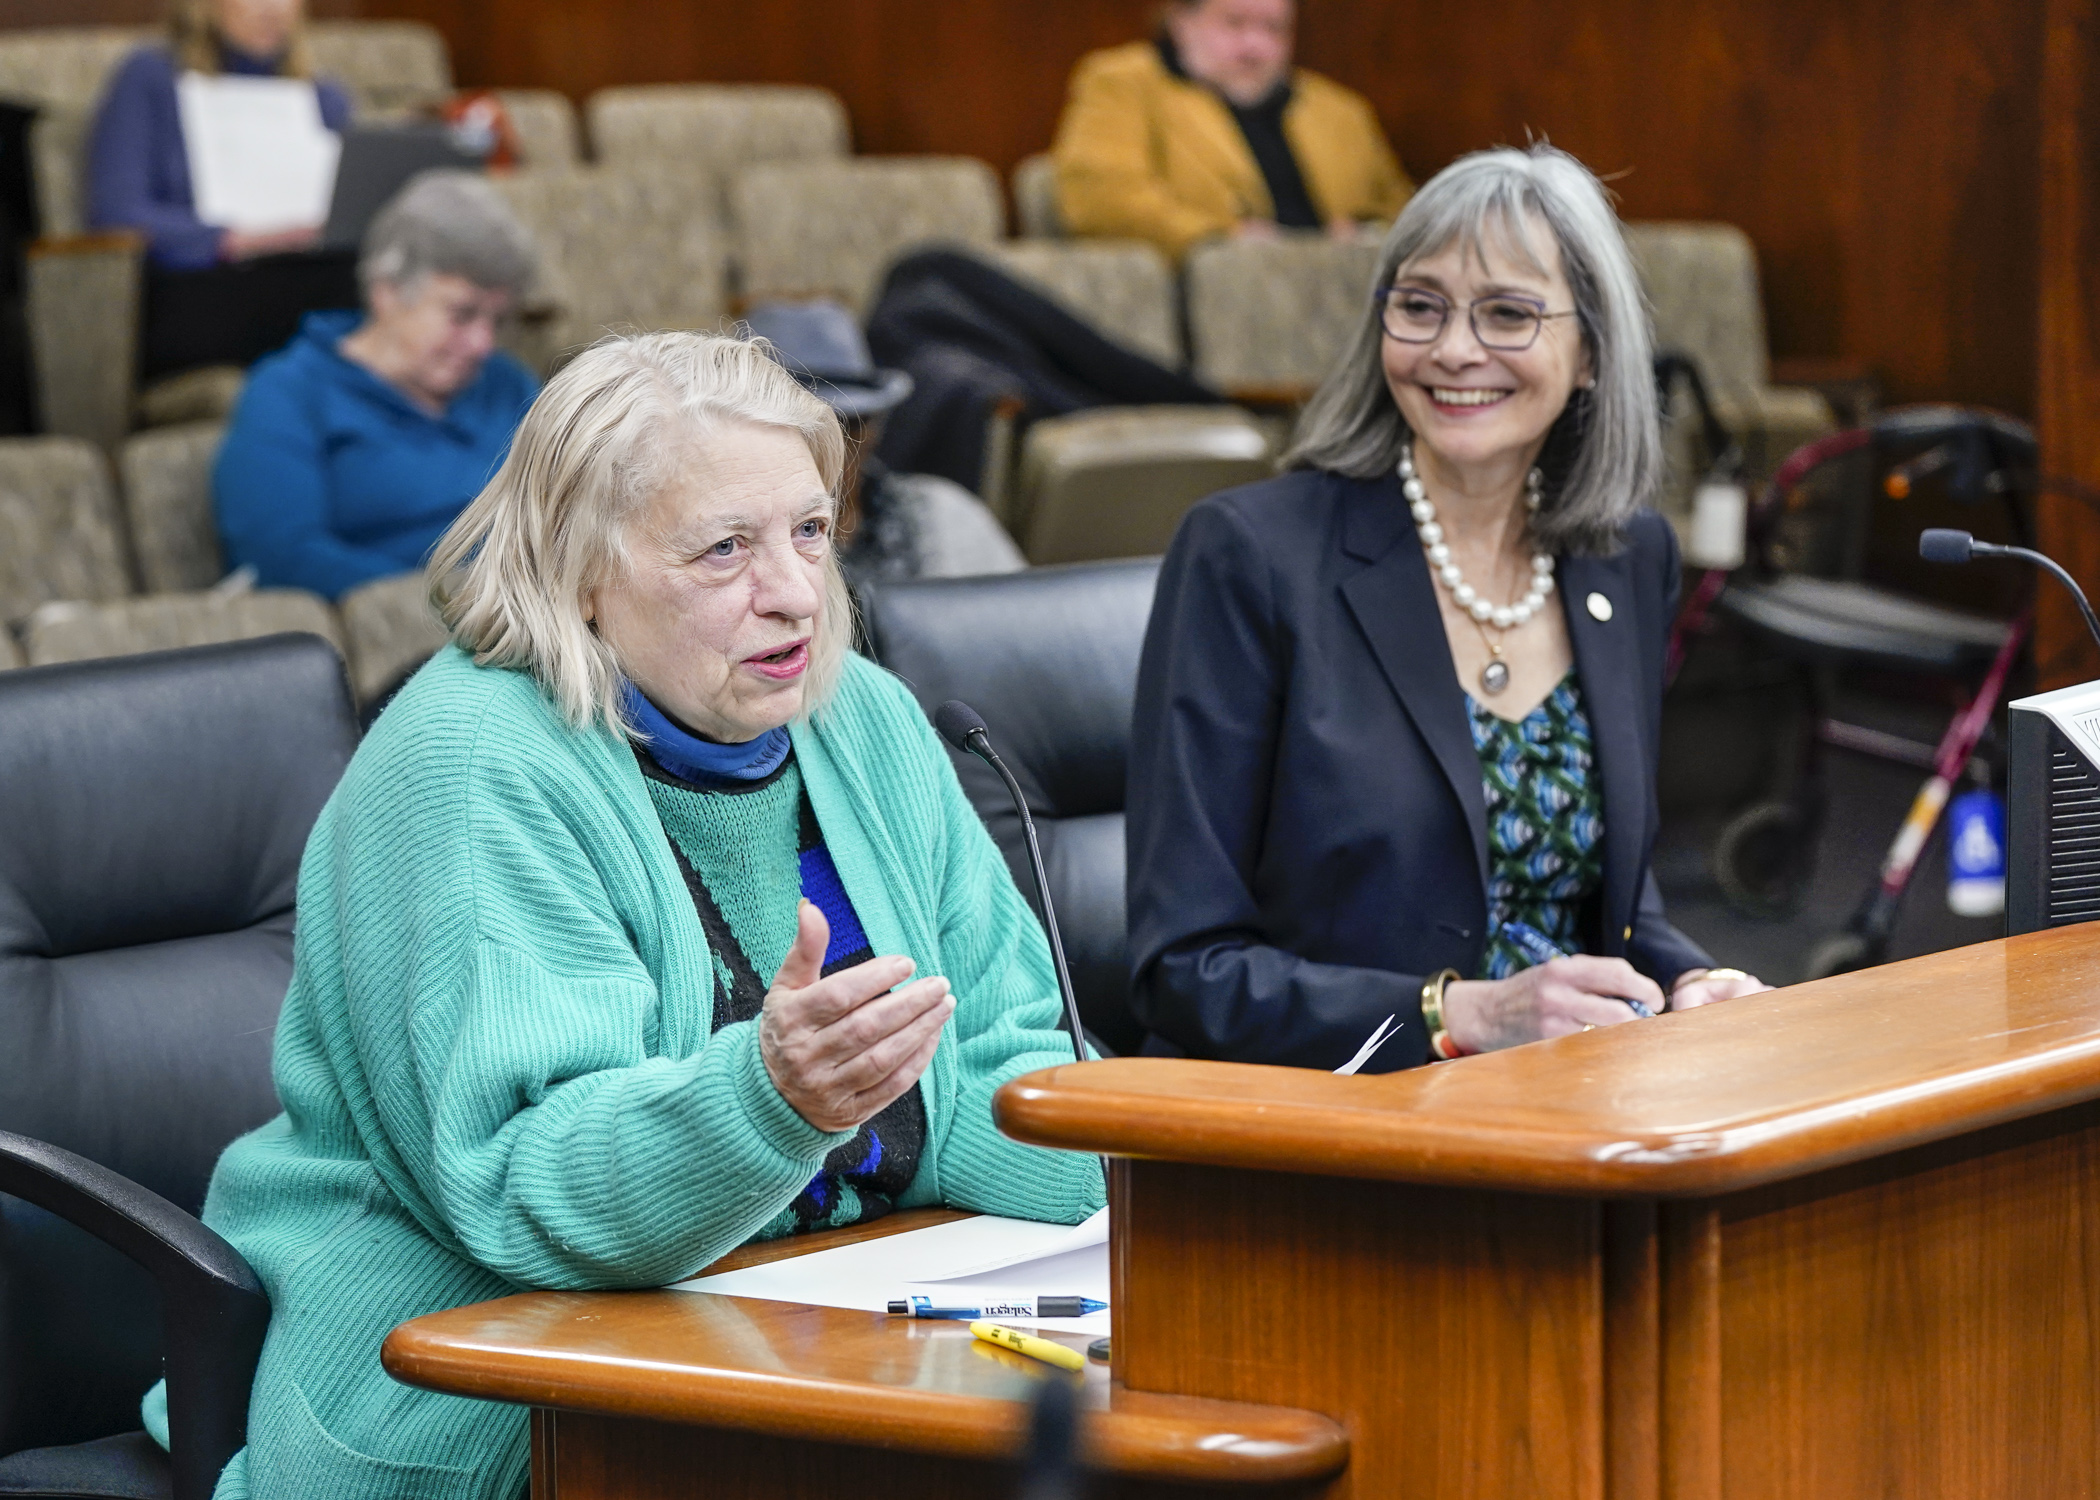 Louise Sundin, a member of the AFL-CIO Retiree Council, testifies before the House State and Local Government Finance and Policy Committee Feb. 7 in support of HF979, sponsored by Rep. Ginny Klevorn, right. (Photo by Catherine Davis)